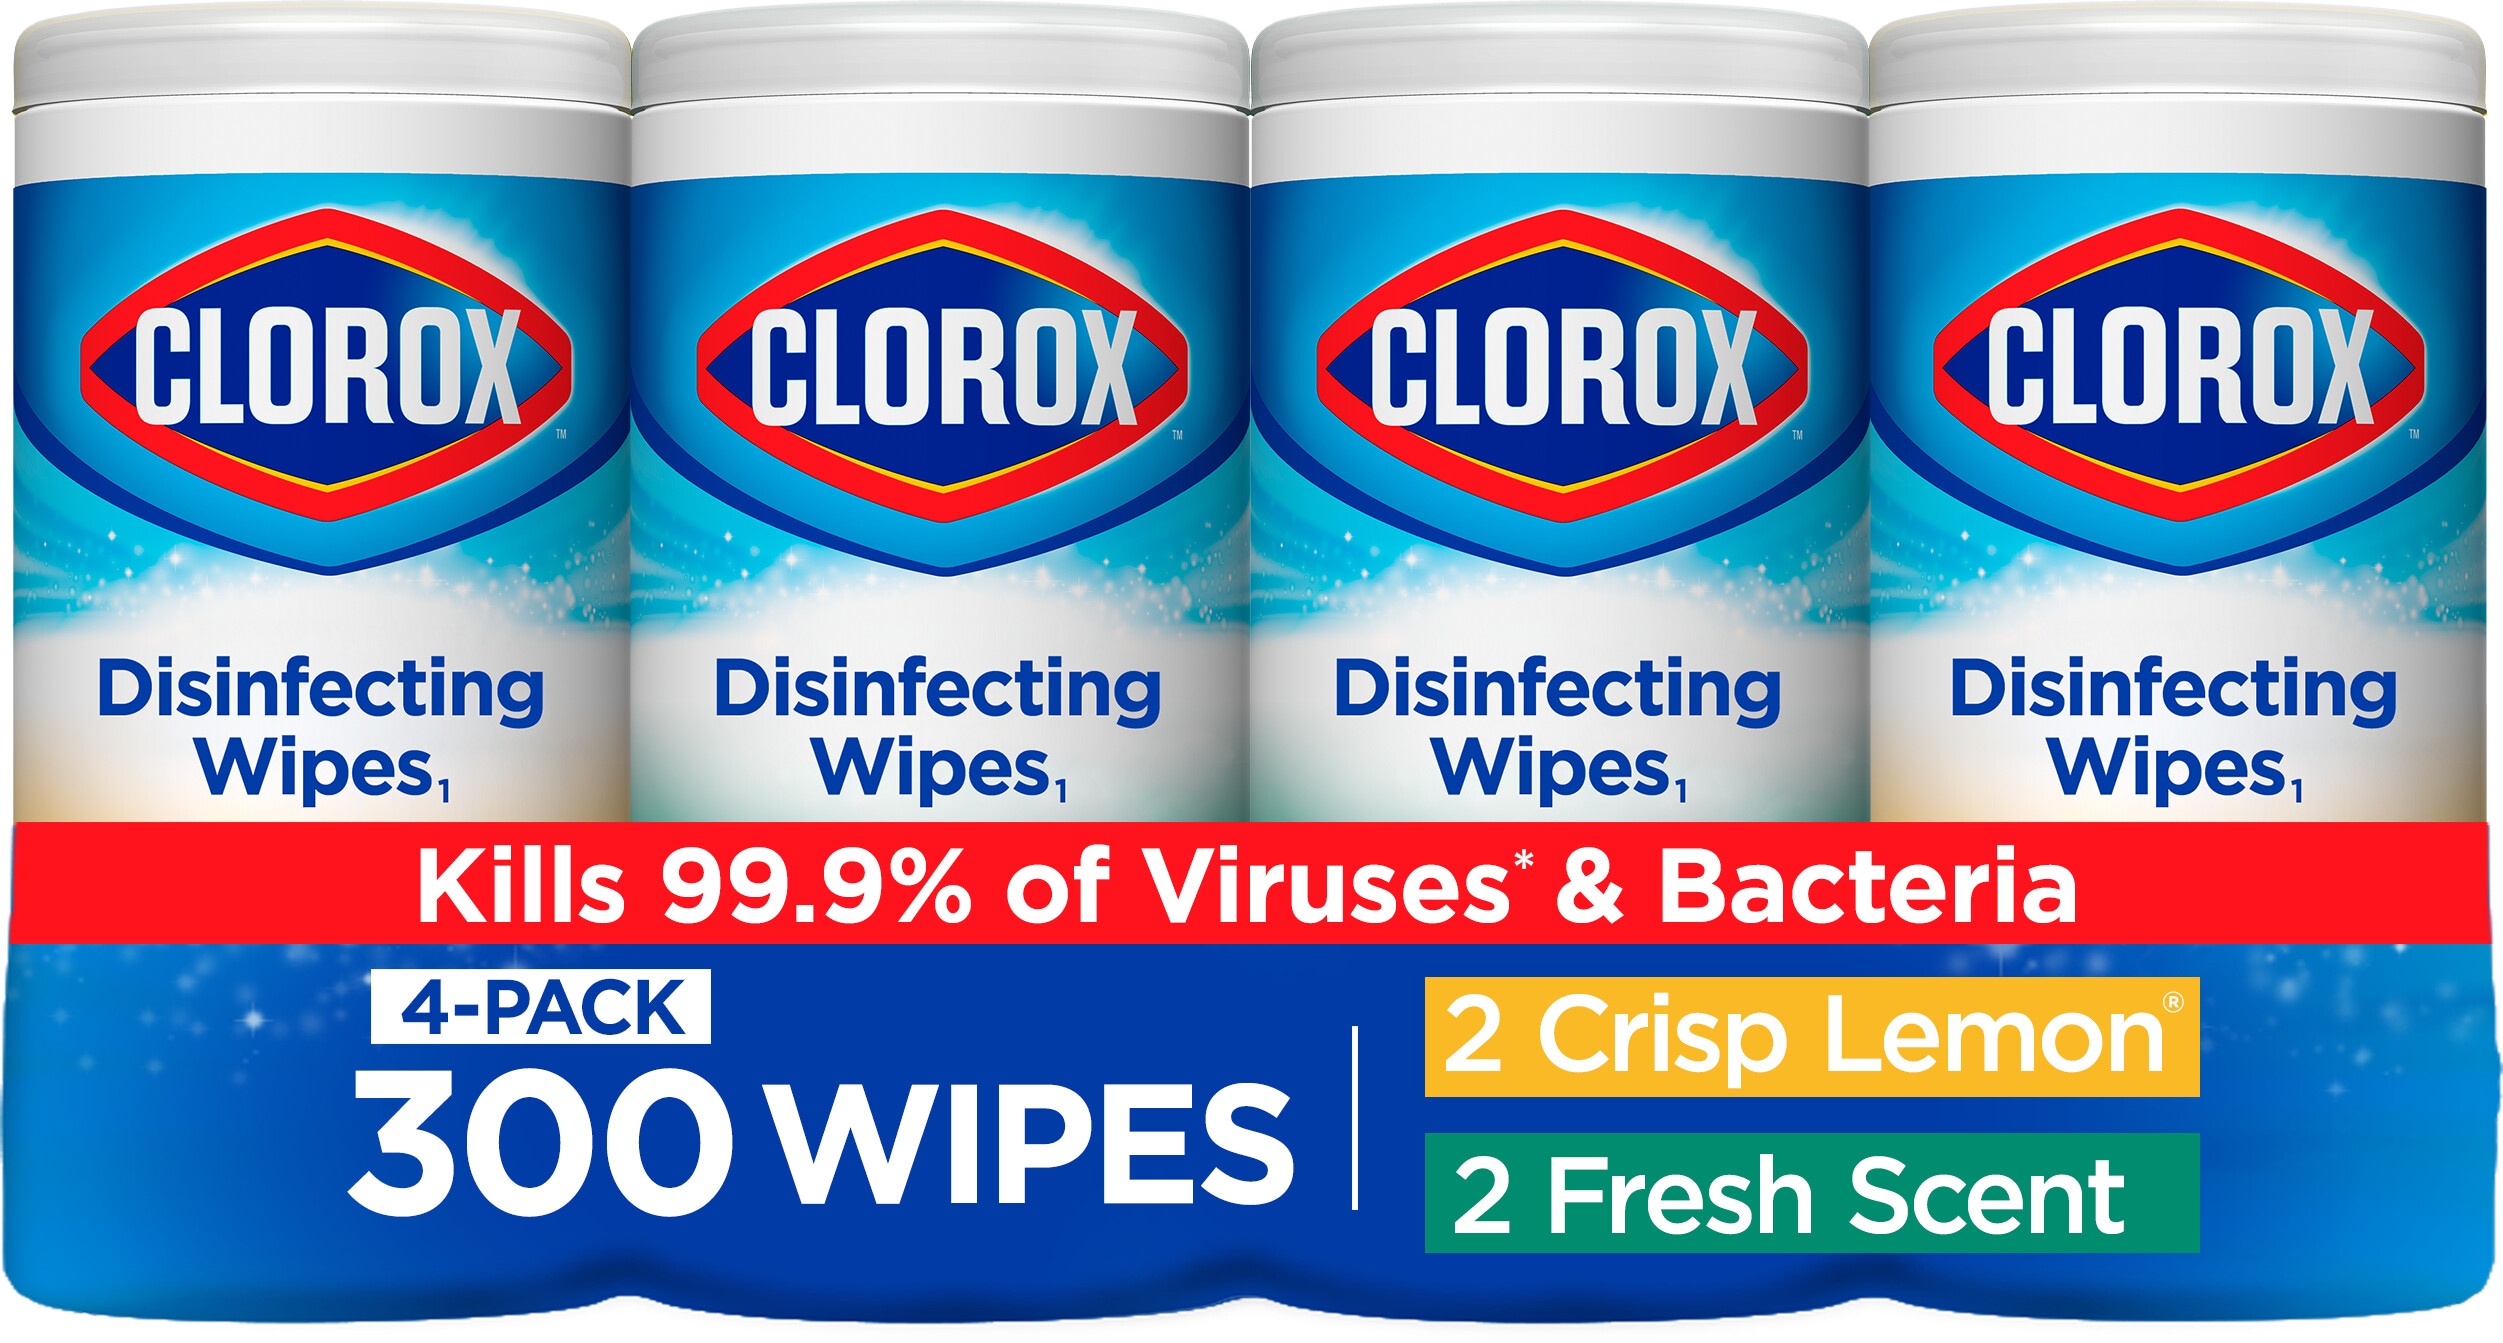 Brand - Solimo Disinfecting Wipes 225 wipes $8.99